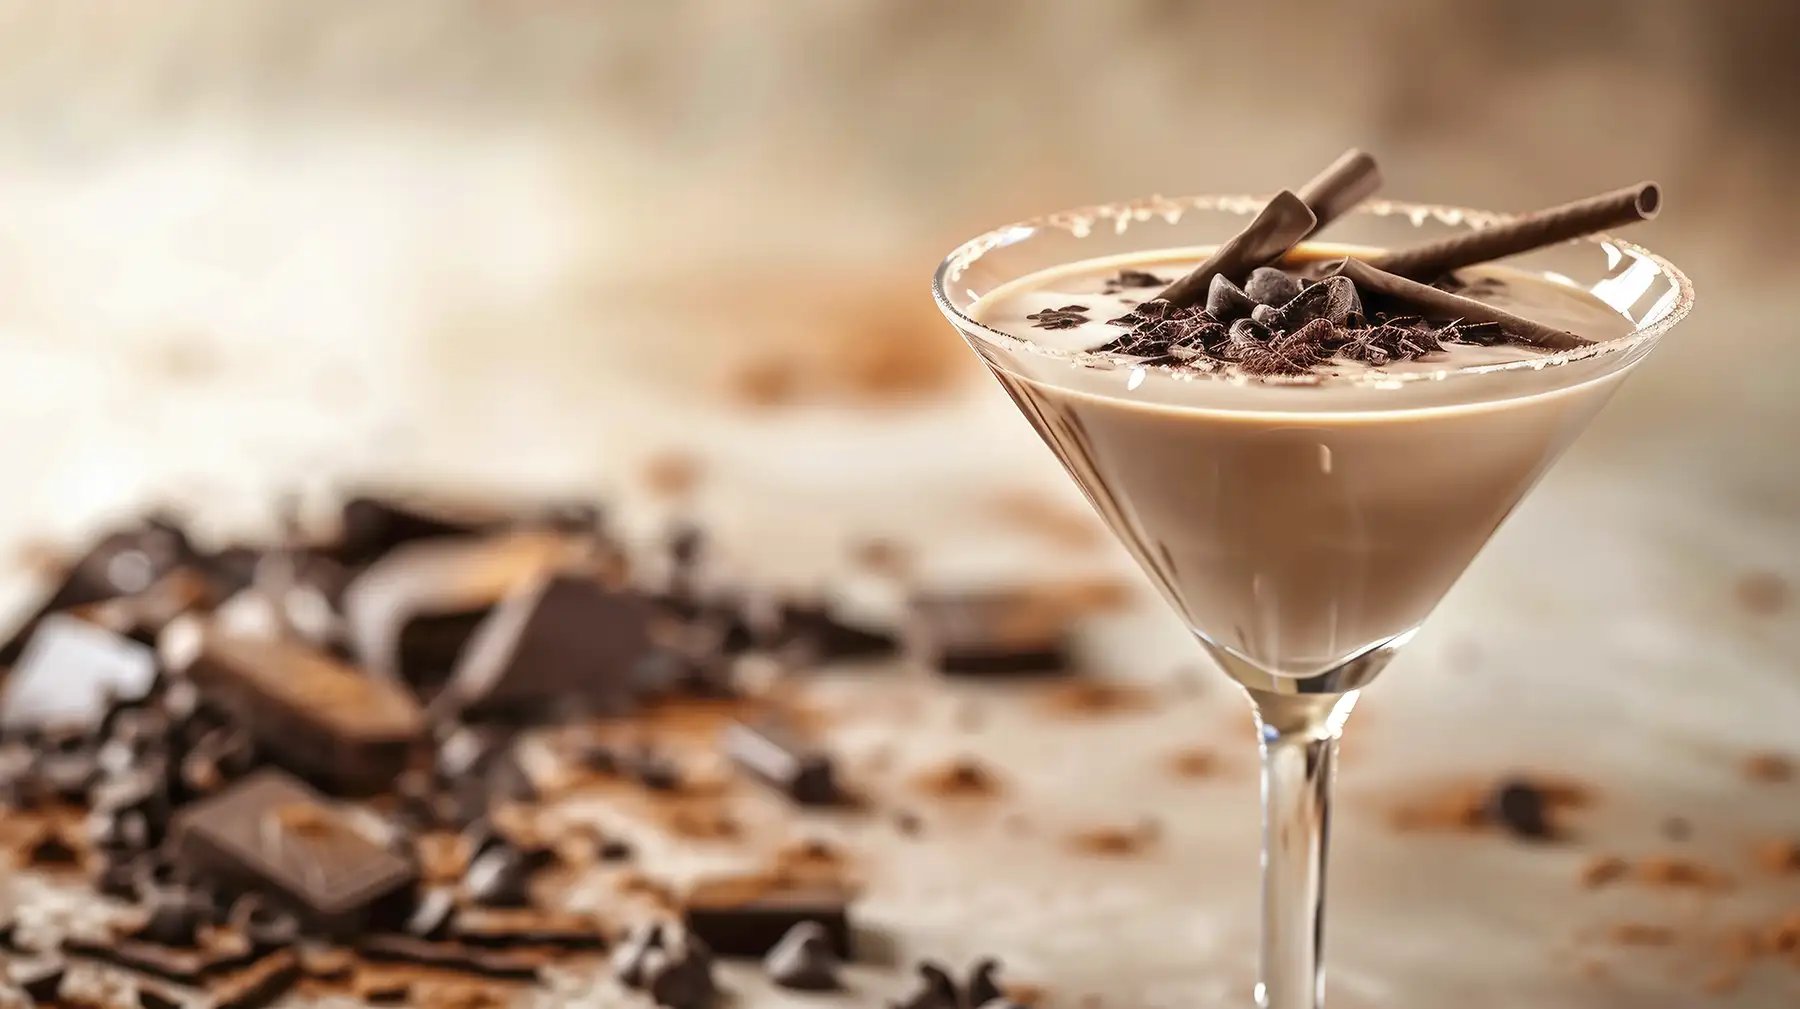 A chocolate martini with chocolate sticks and shavings as garnishes and accents